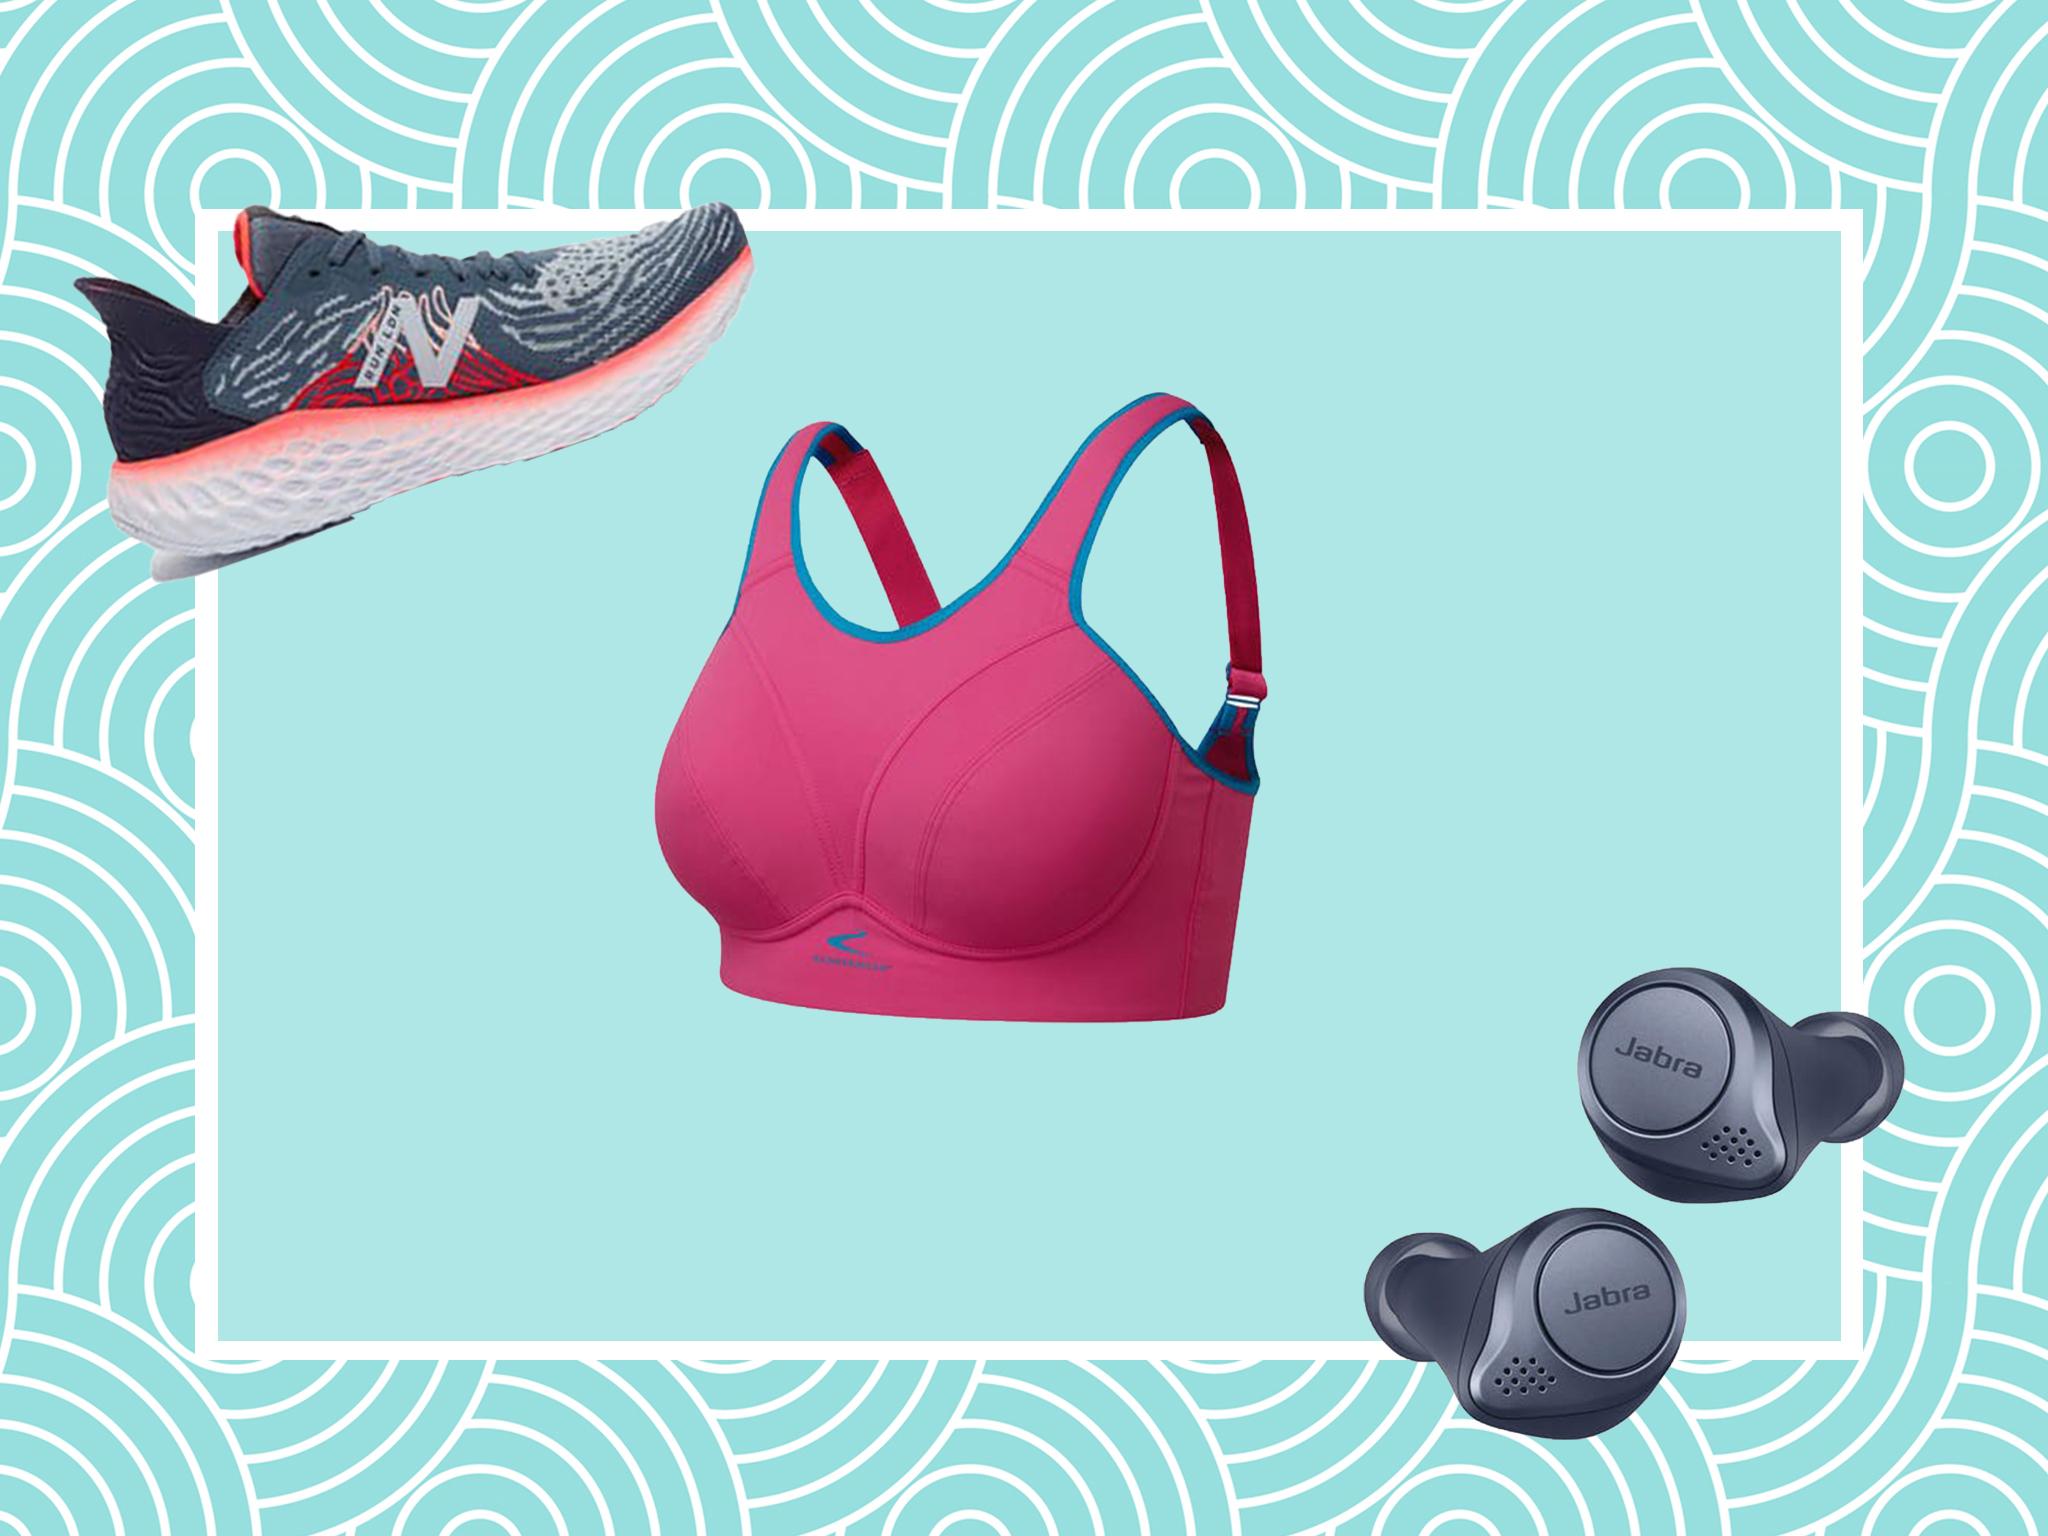 Gyms reopening: All the workout gear you need to get back on the treadmill